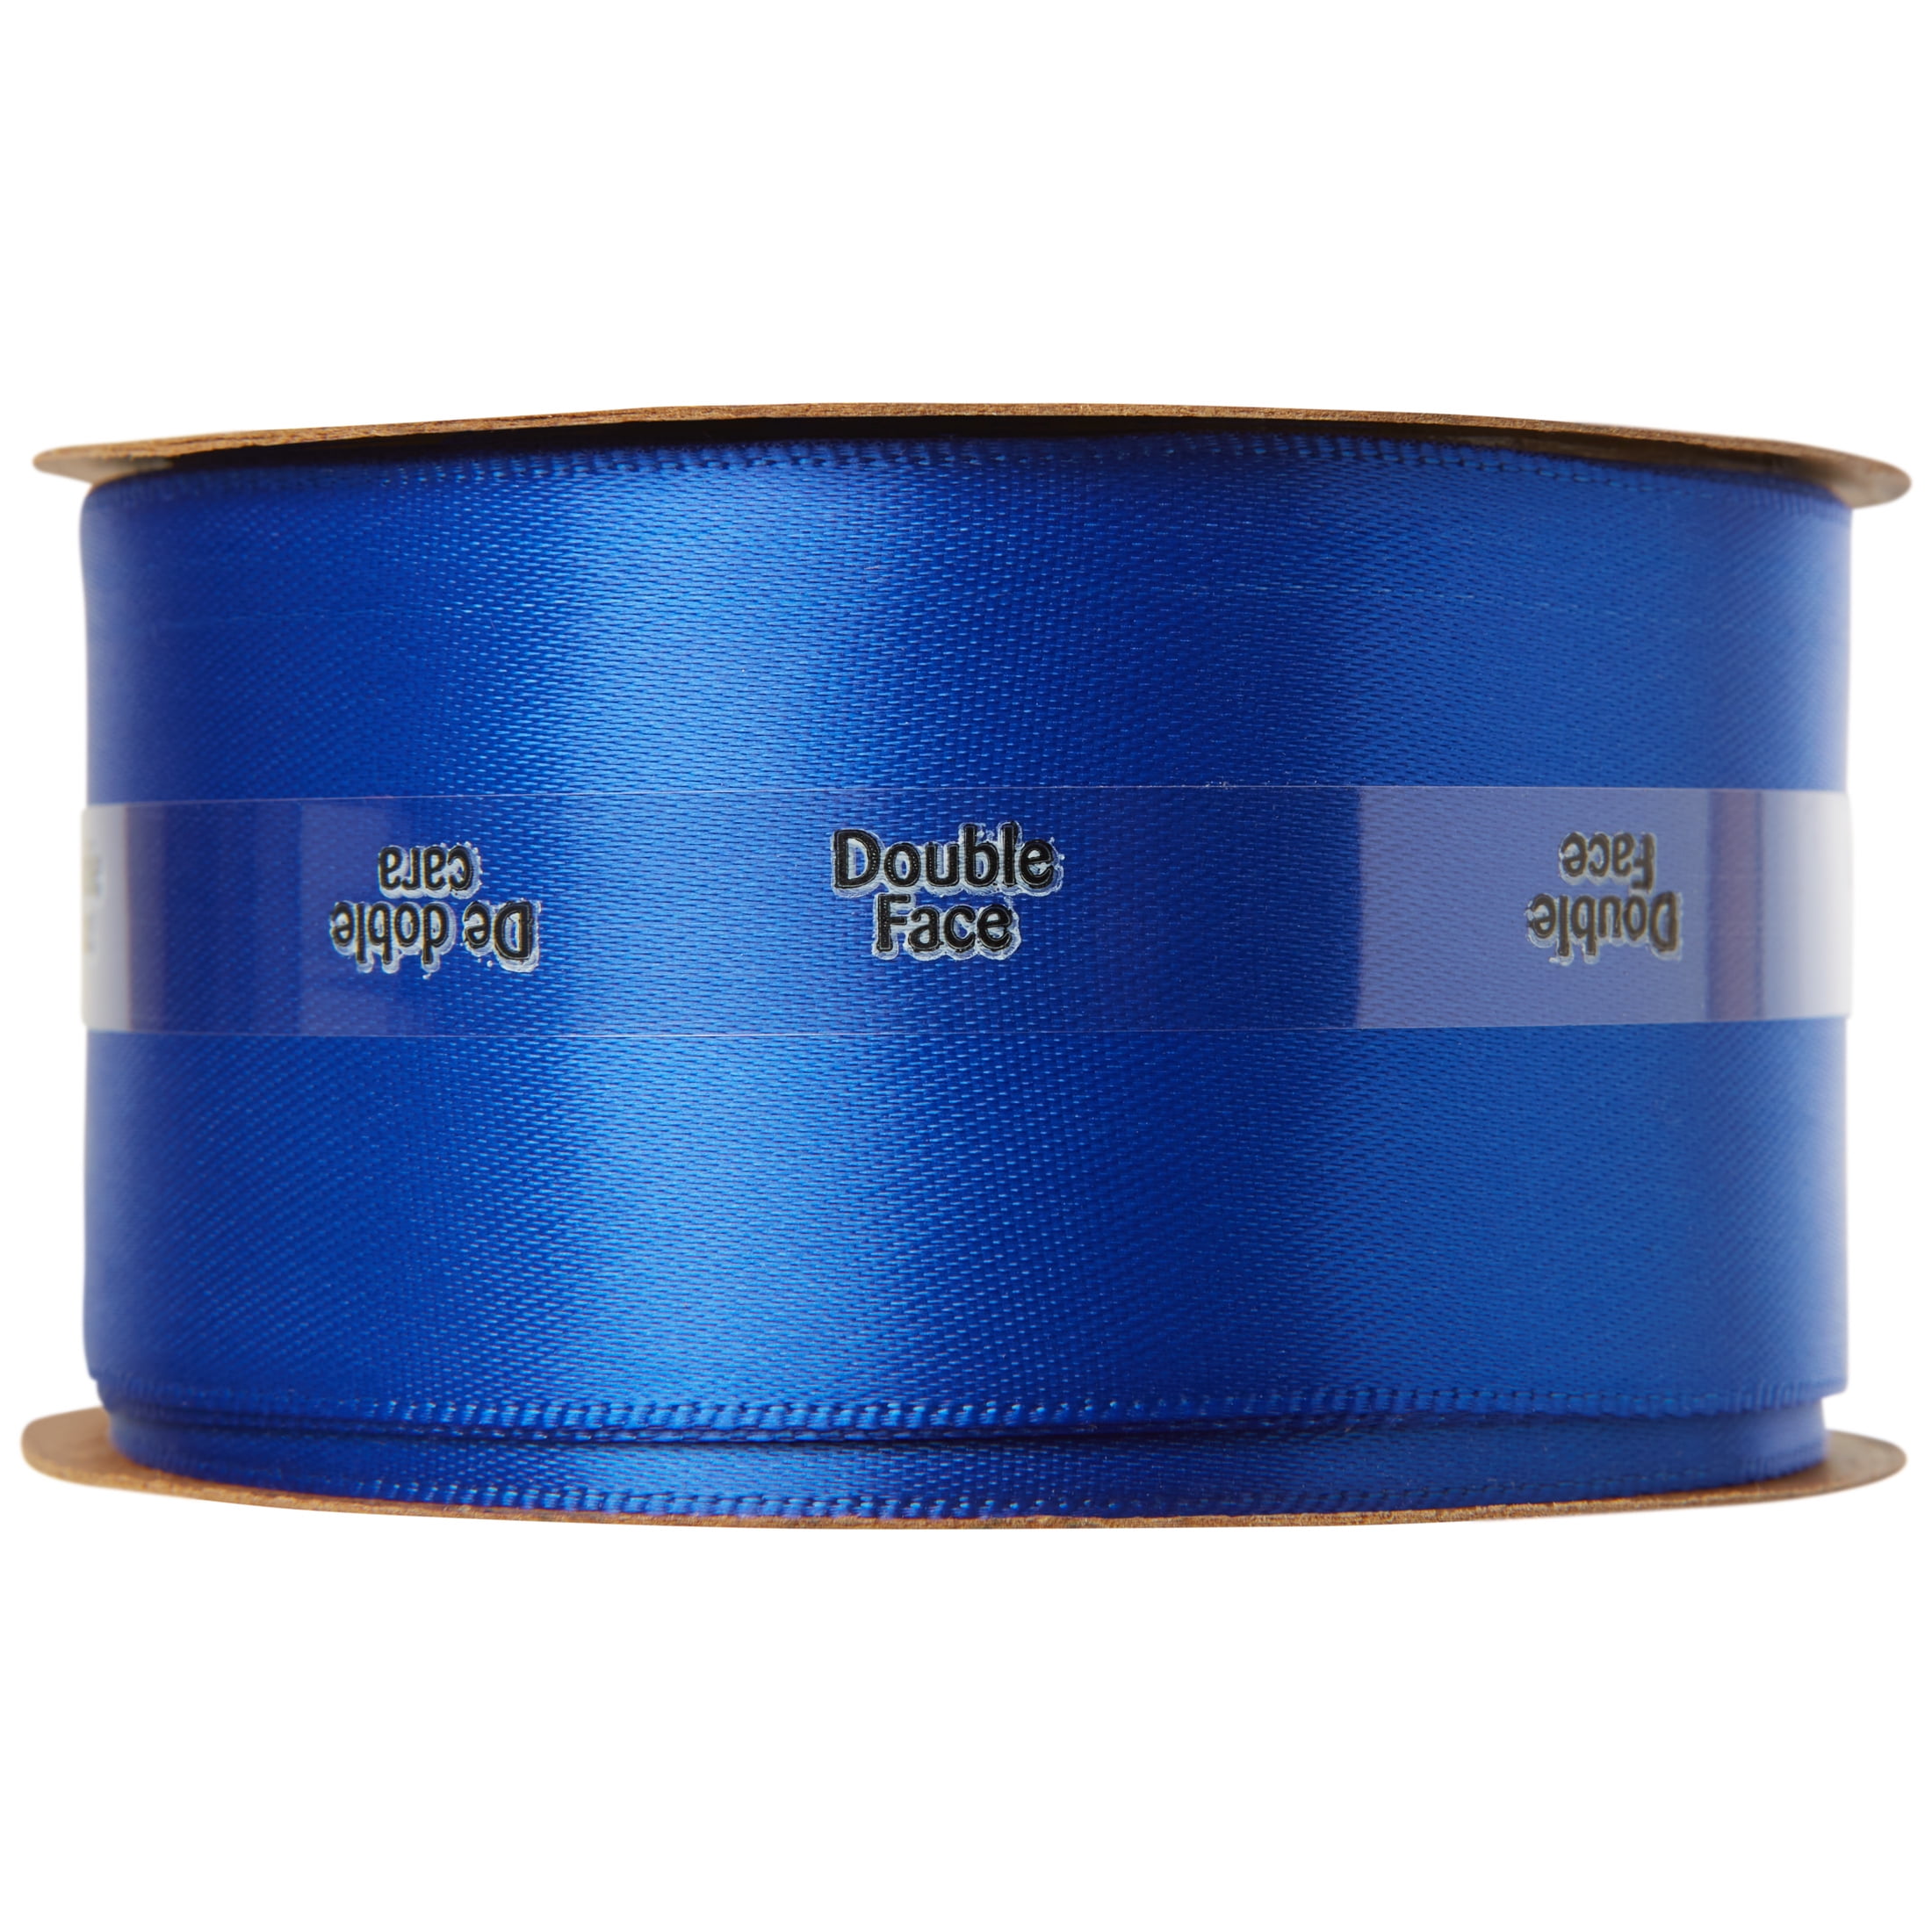 Royal Blue 1-1/2 x 50 Yards Solid Color Satin Ribbon, Double Faced High Density Polyester Fabric Ribbon for Gifts Wrapping, Wedding, Party, Crafts